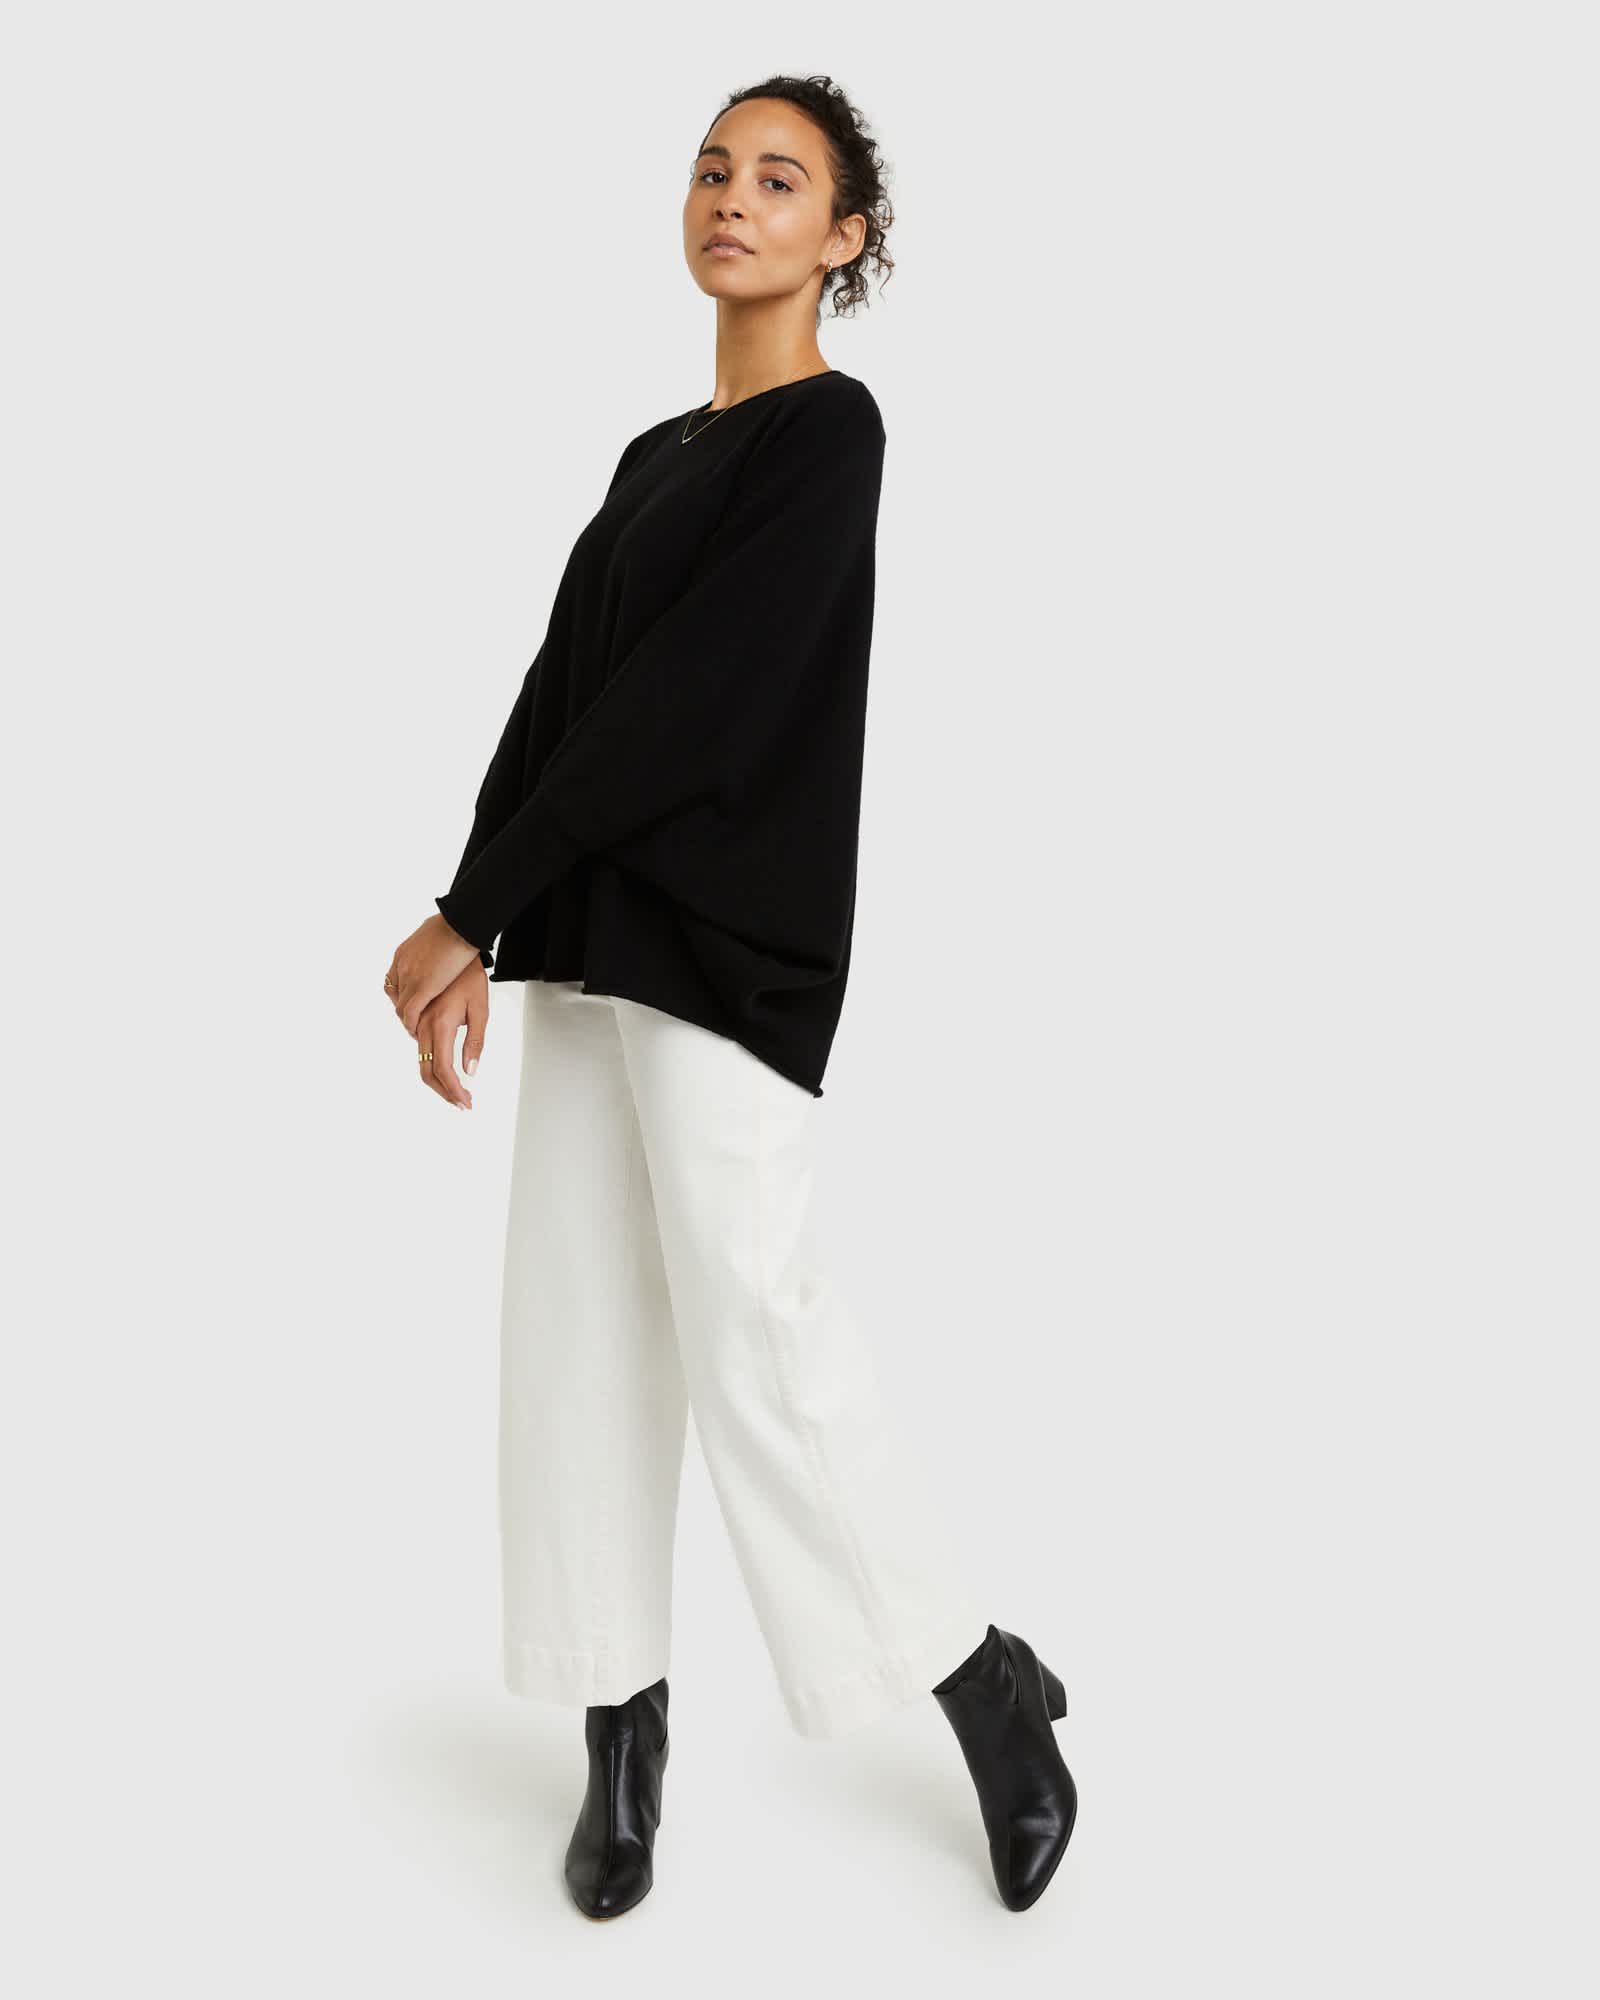 Woman wearing batwing sweater made from cashmere in black from the side